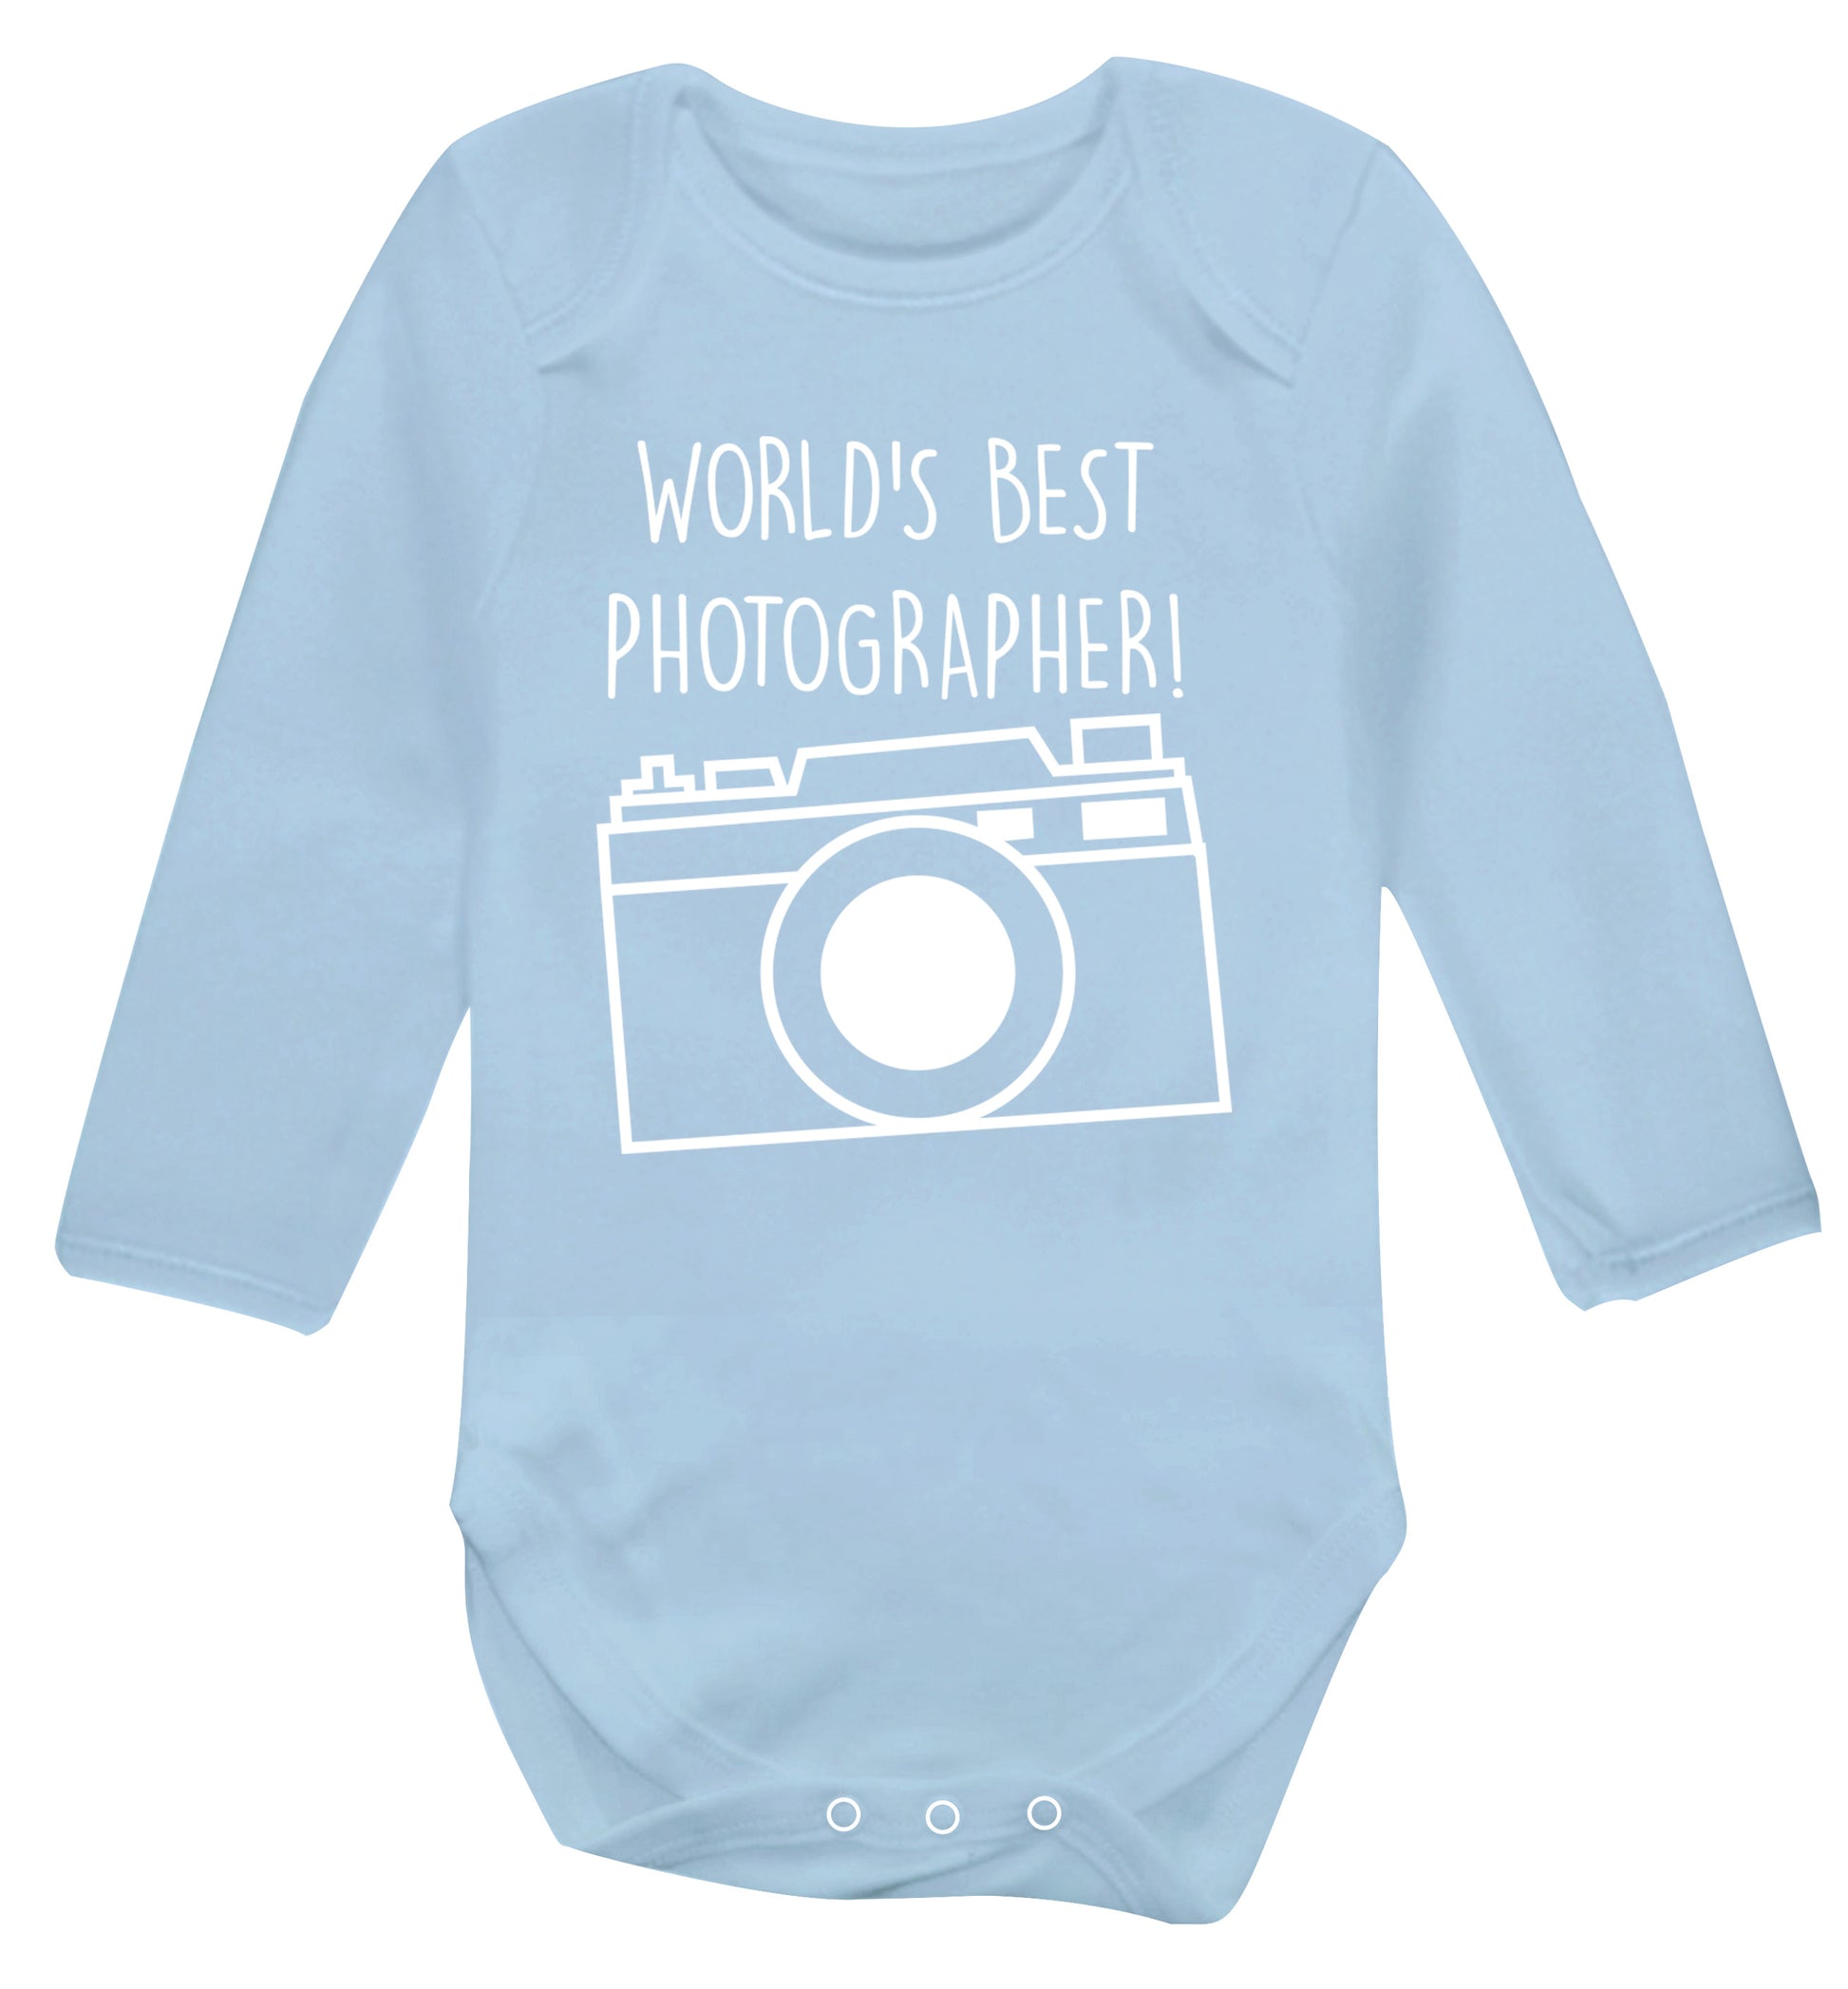 Worlds best photographer  Baby Vest long sleeved pale blue 6-12 months